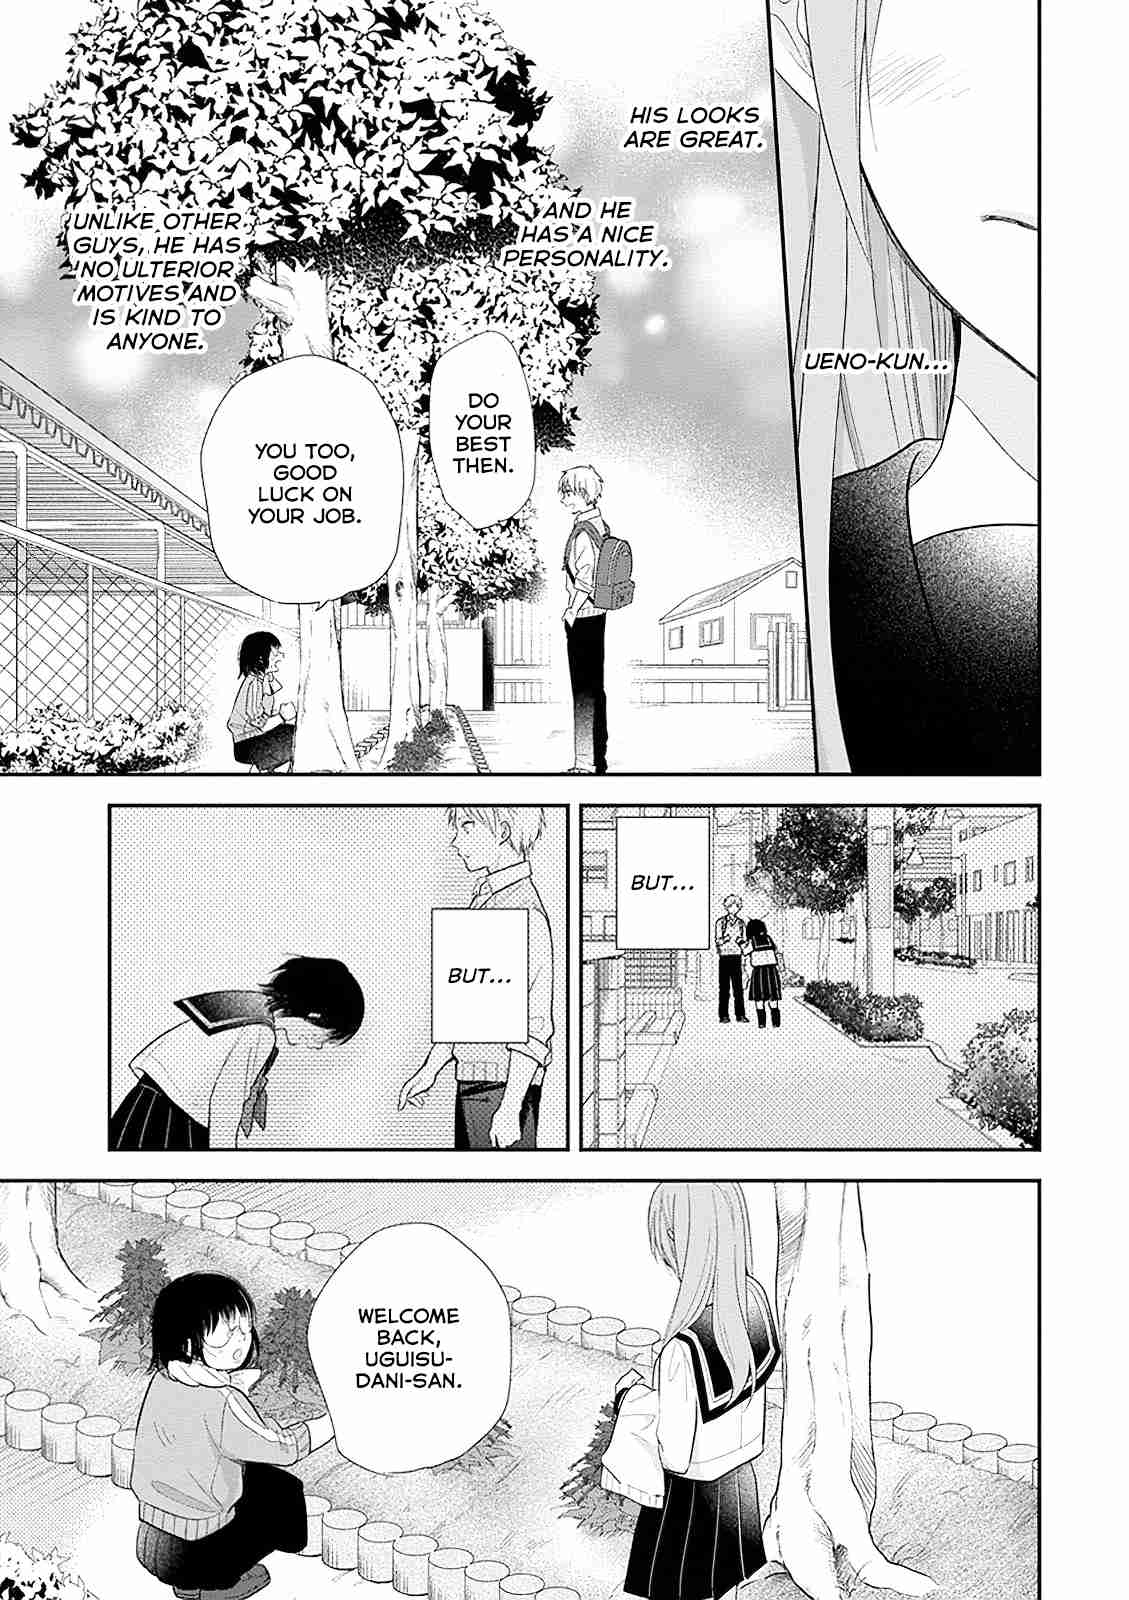 A Bouquet For An Ugly Girl Vol. 1 Ch. 6 Fabricated Cuteness